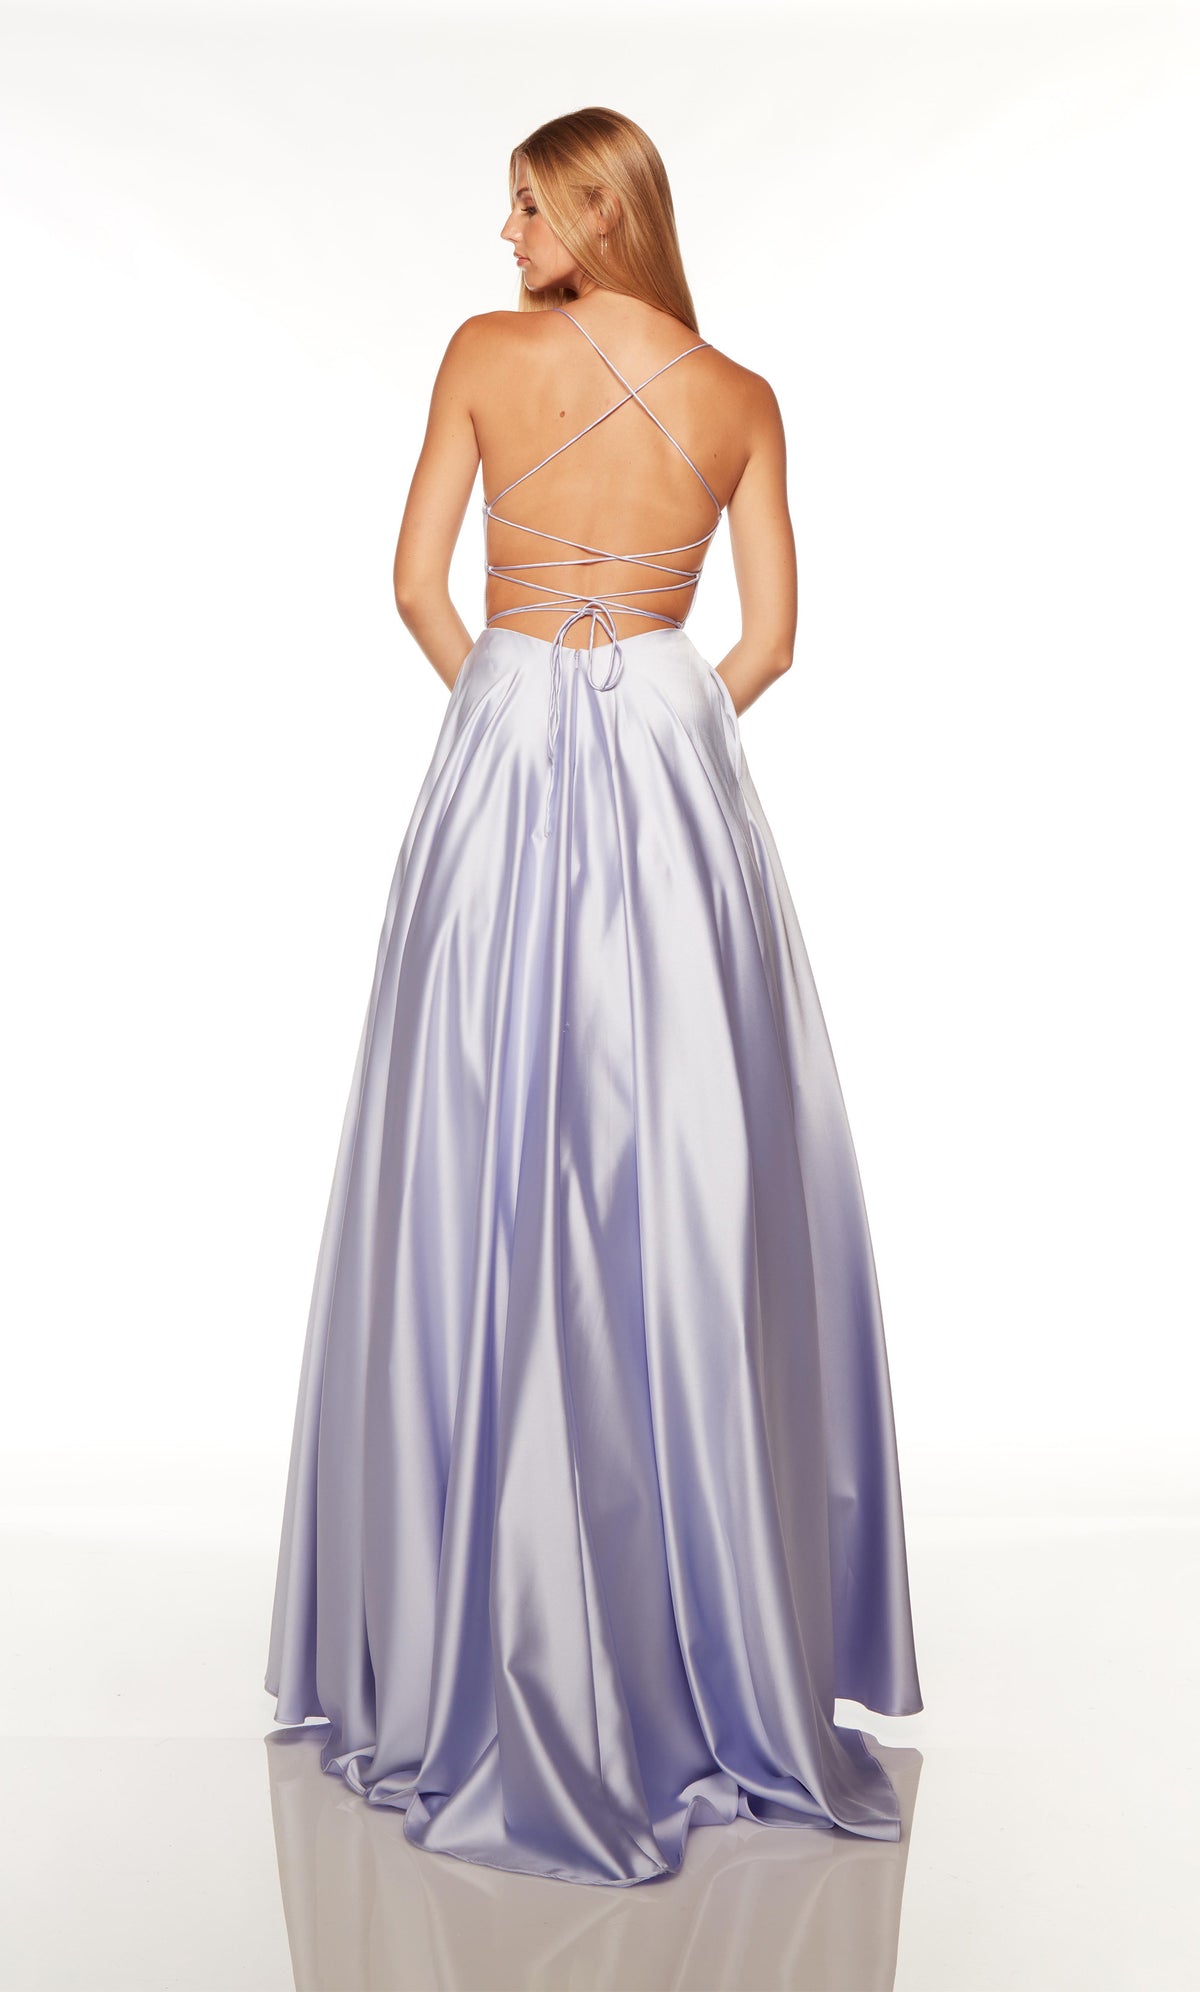 Lilac purple formal dress with a strappy, lace-up back and train.